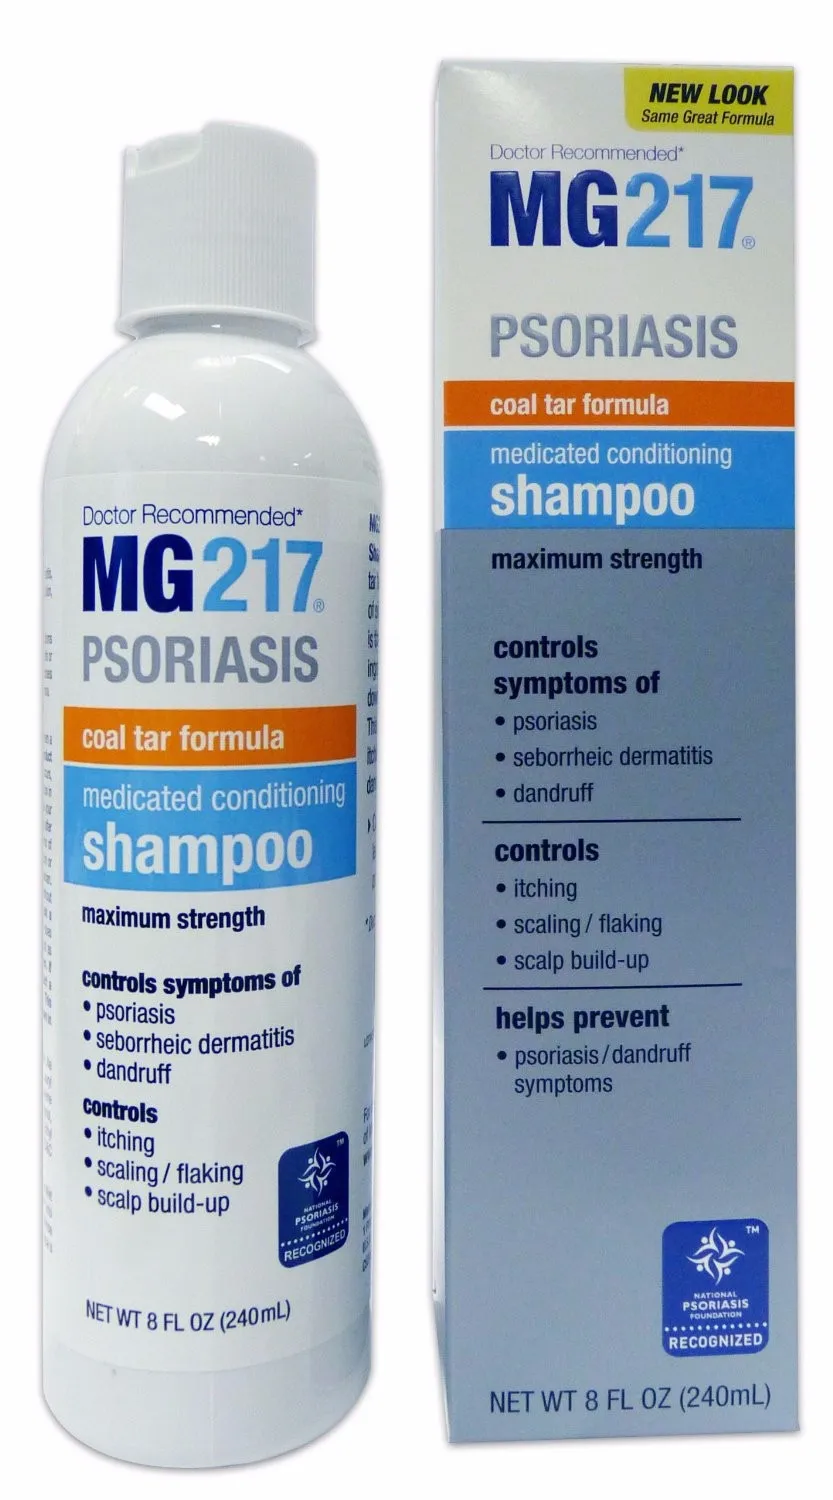 Psoriasin shampoo side effects